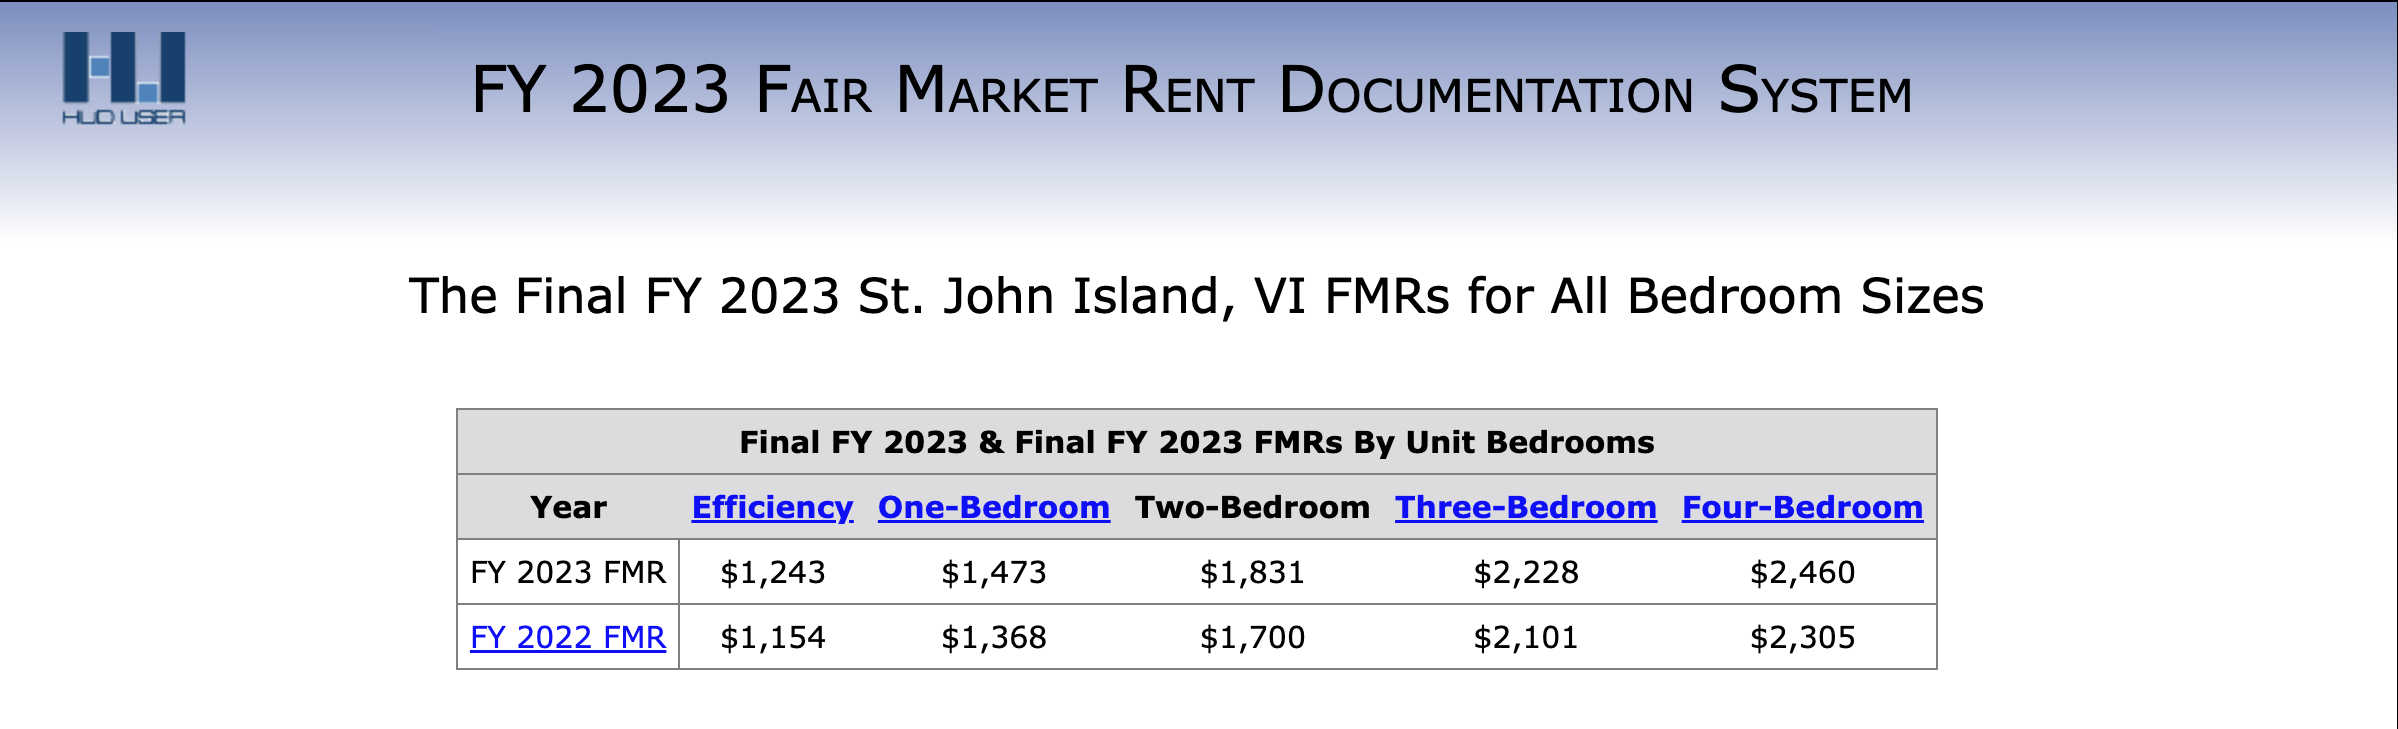 HUD Releases 2023 Fair Rent Prices For St. Croix, St. Thomas and St. John